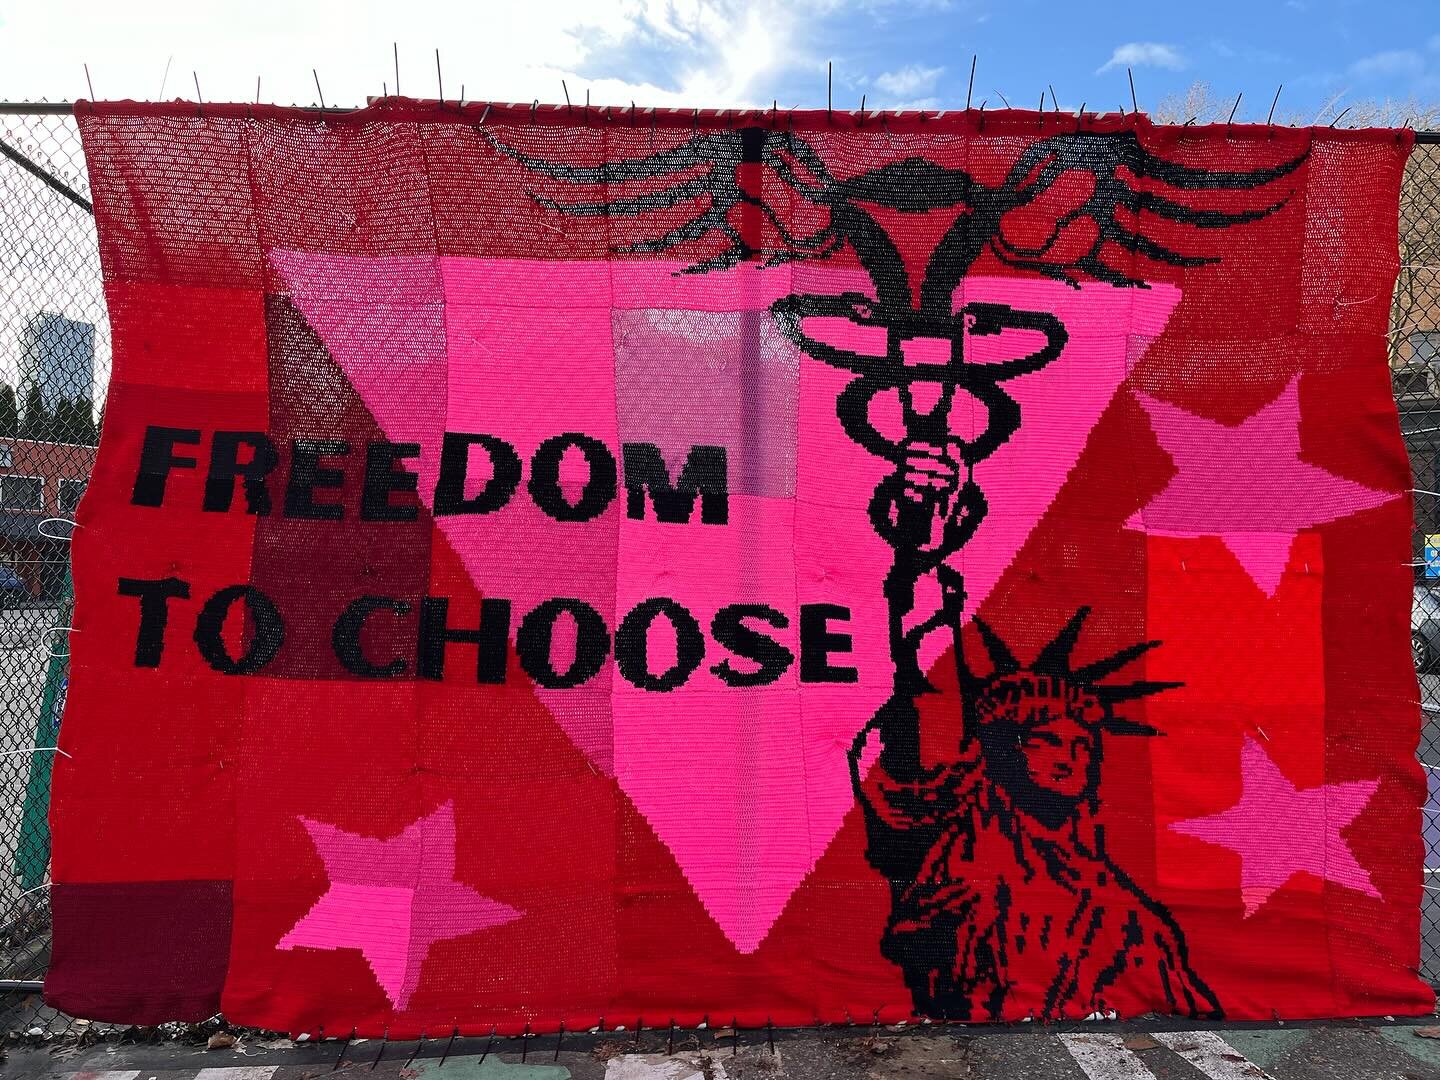 Washington state liberty crochet mural up on display in downtown Seattle. Denny and Vine. Stop by shout your right to choose. Thank you to the crocheters for your creative dissent. WITH EVERY STITCH WE DISSENT!
🧶and to our mighty hosts Denise and Te